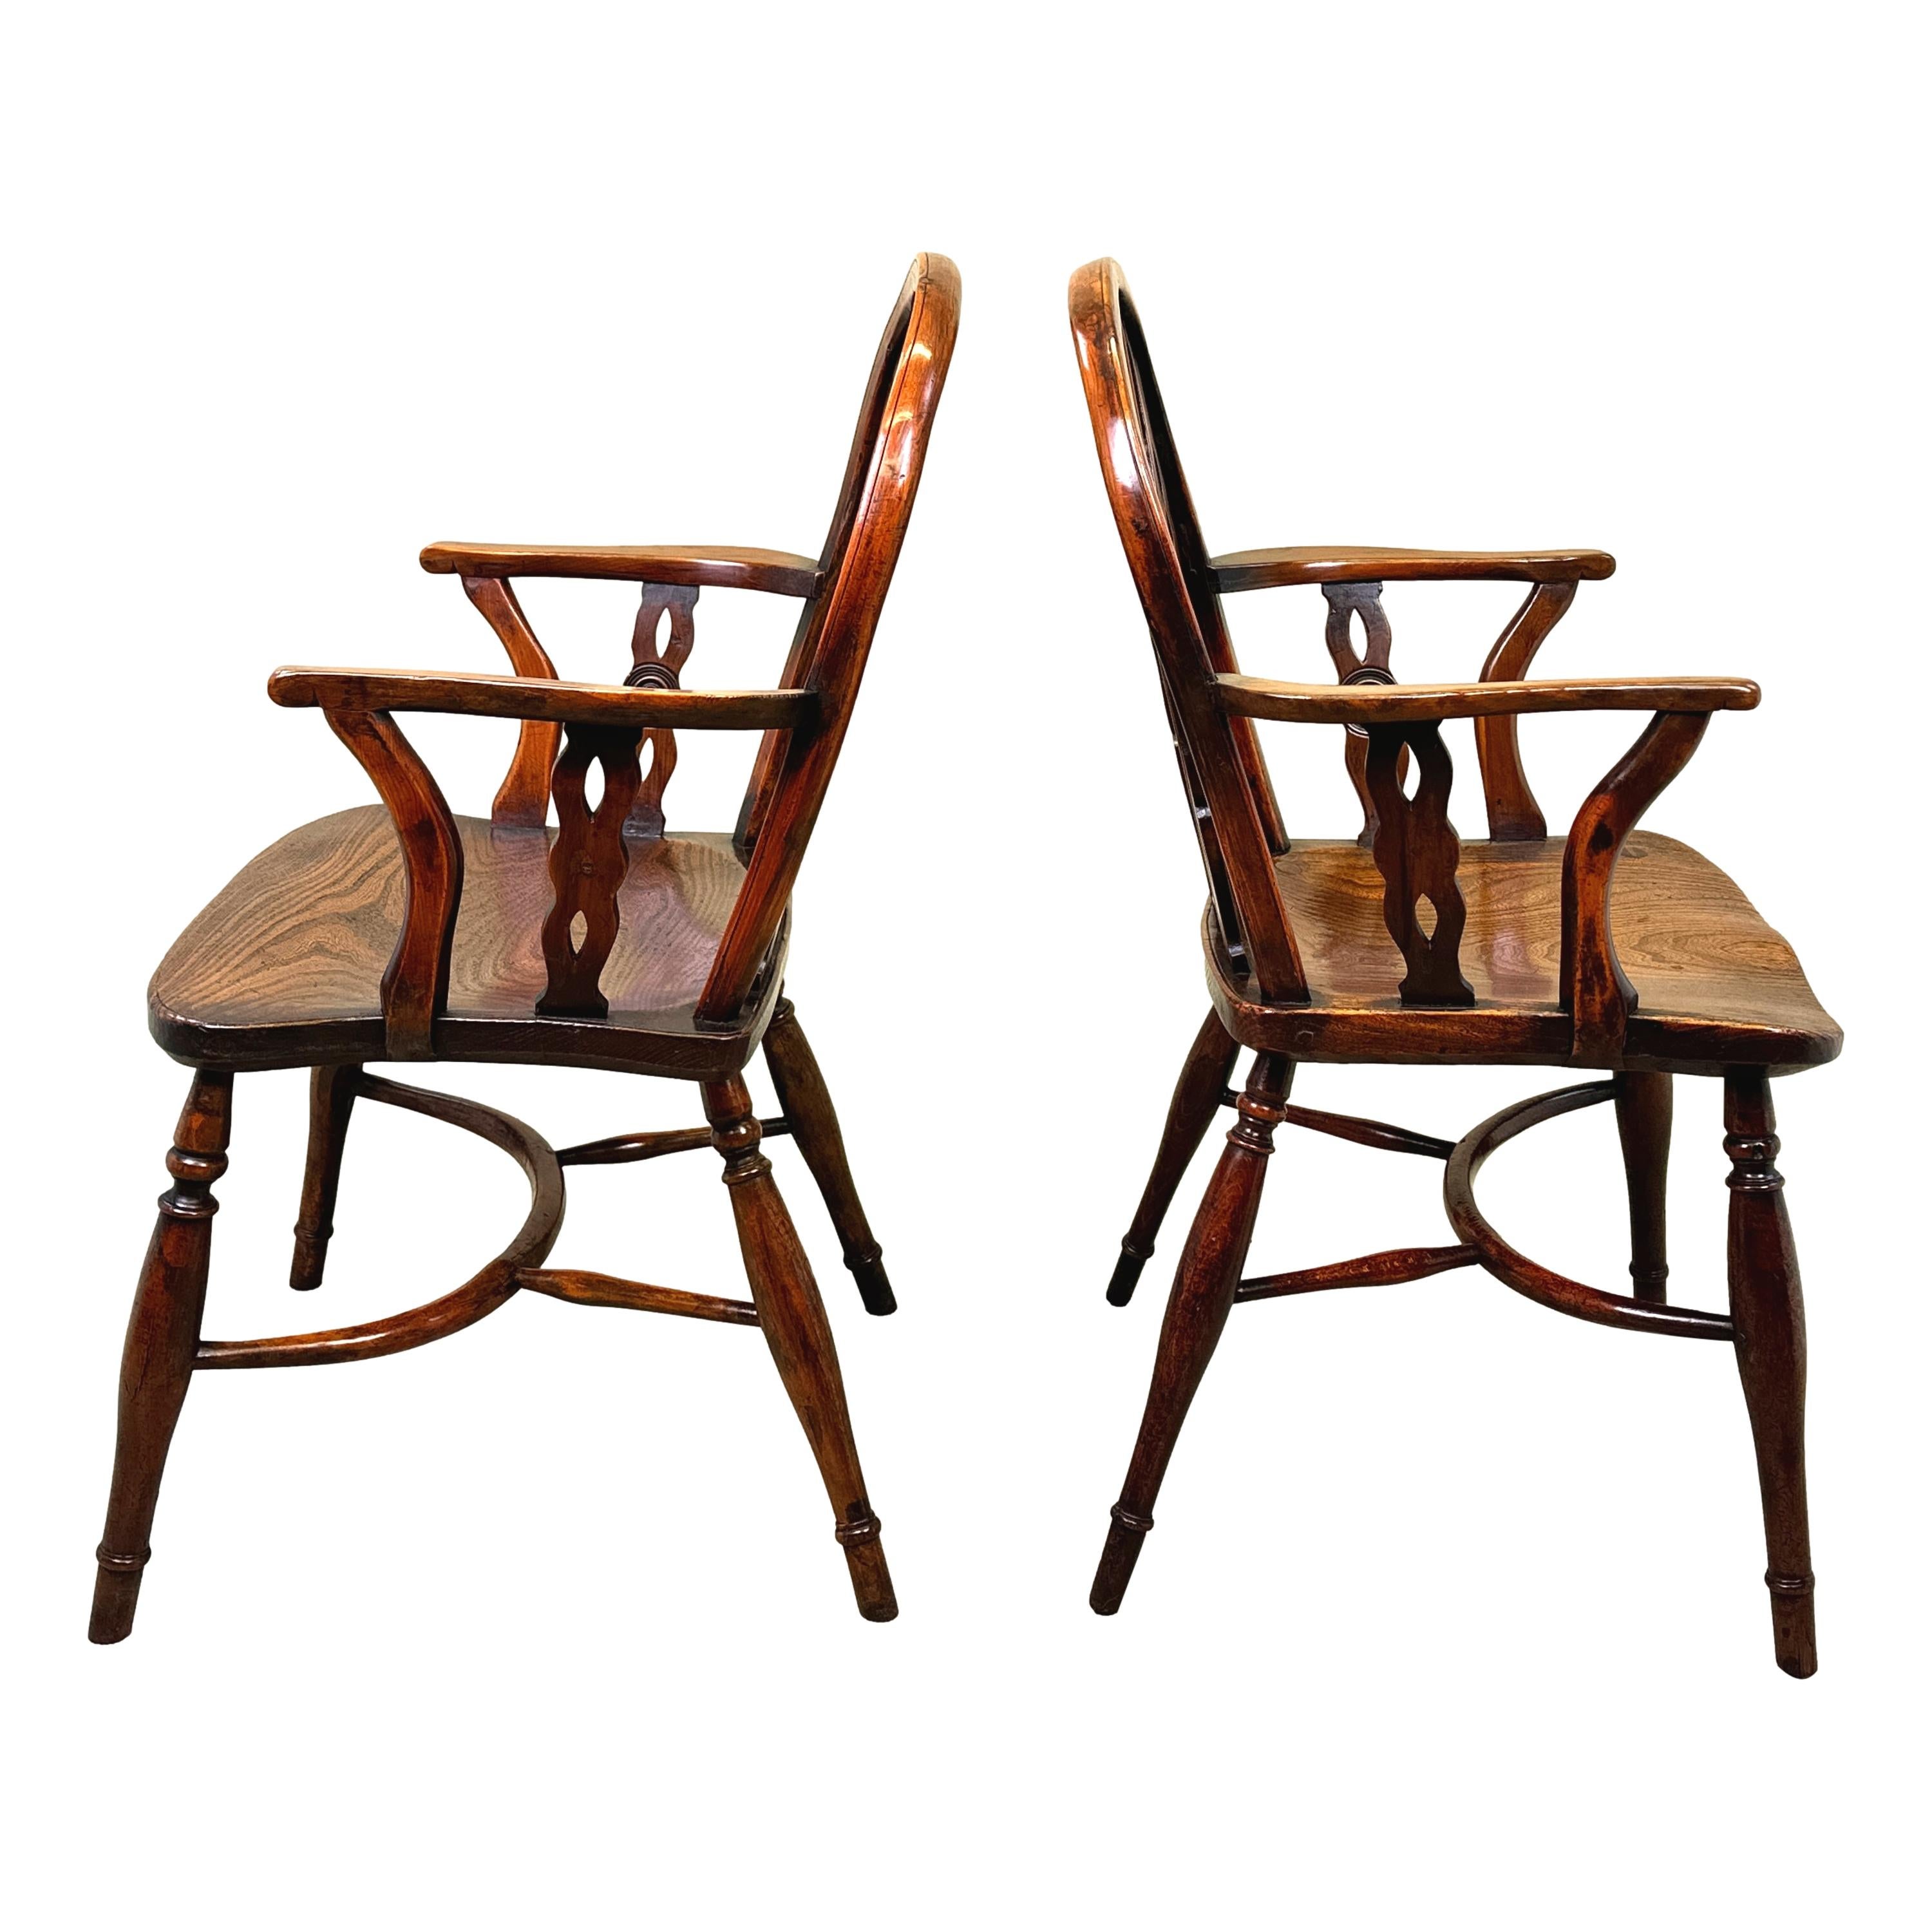 A Charming Near Matching Pair of Early 19th Century, Georgian, Yew Wood, Low Back Windsor Armchairs Having Three Pierced & Shaped Splats With Central Set Roundels, Or Draughts, Alternating With Turned Spindles To Backs, Over Extremely Well Figured